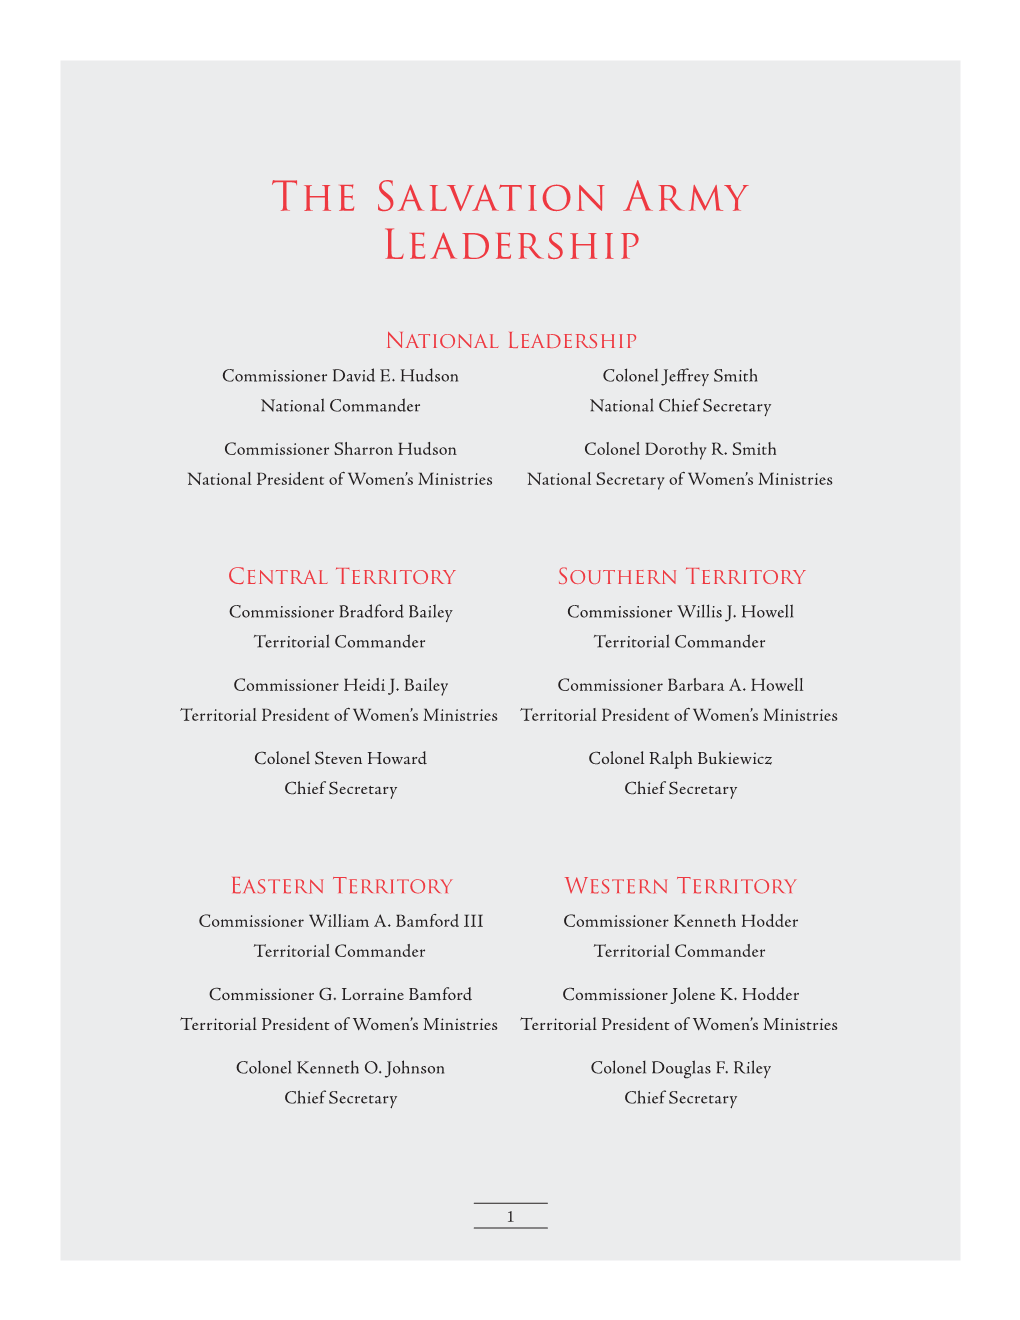 The Salvation Army Leadership